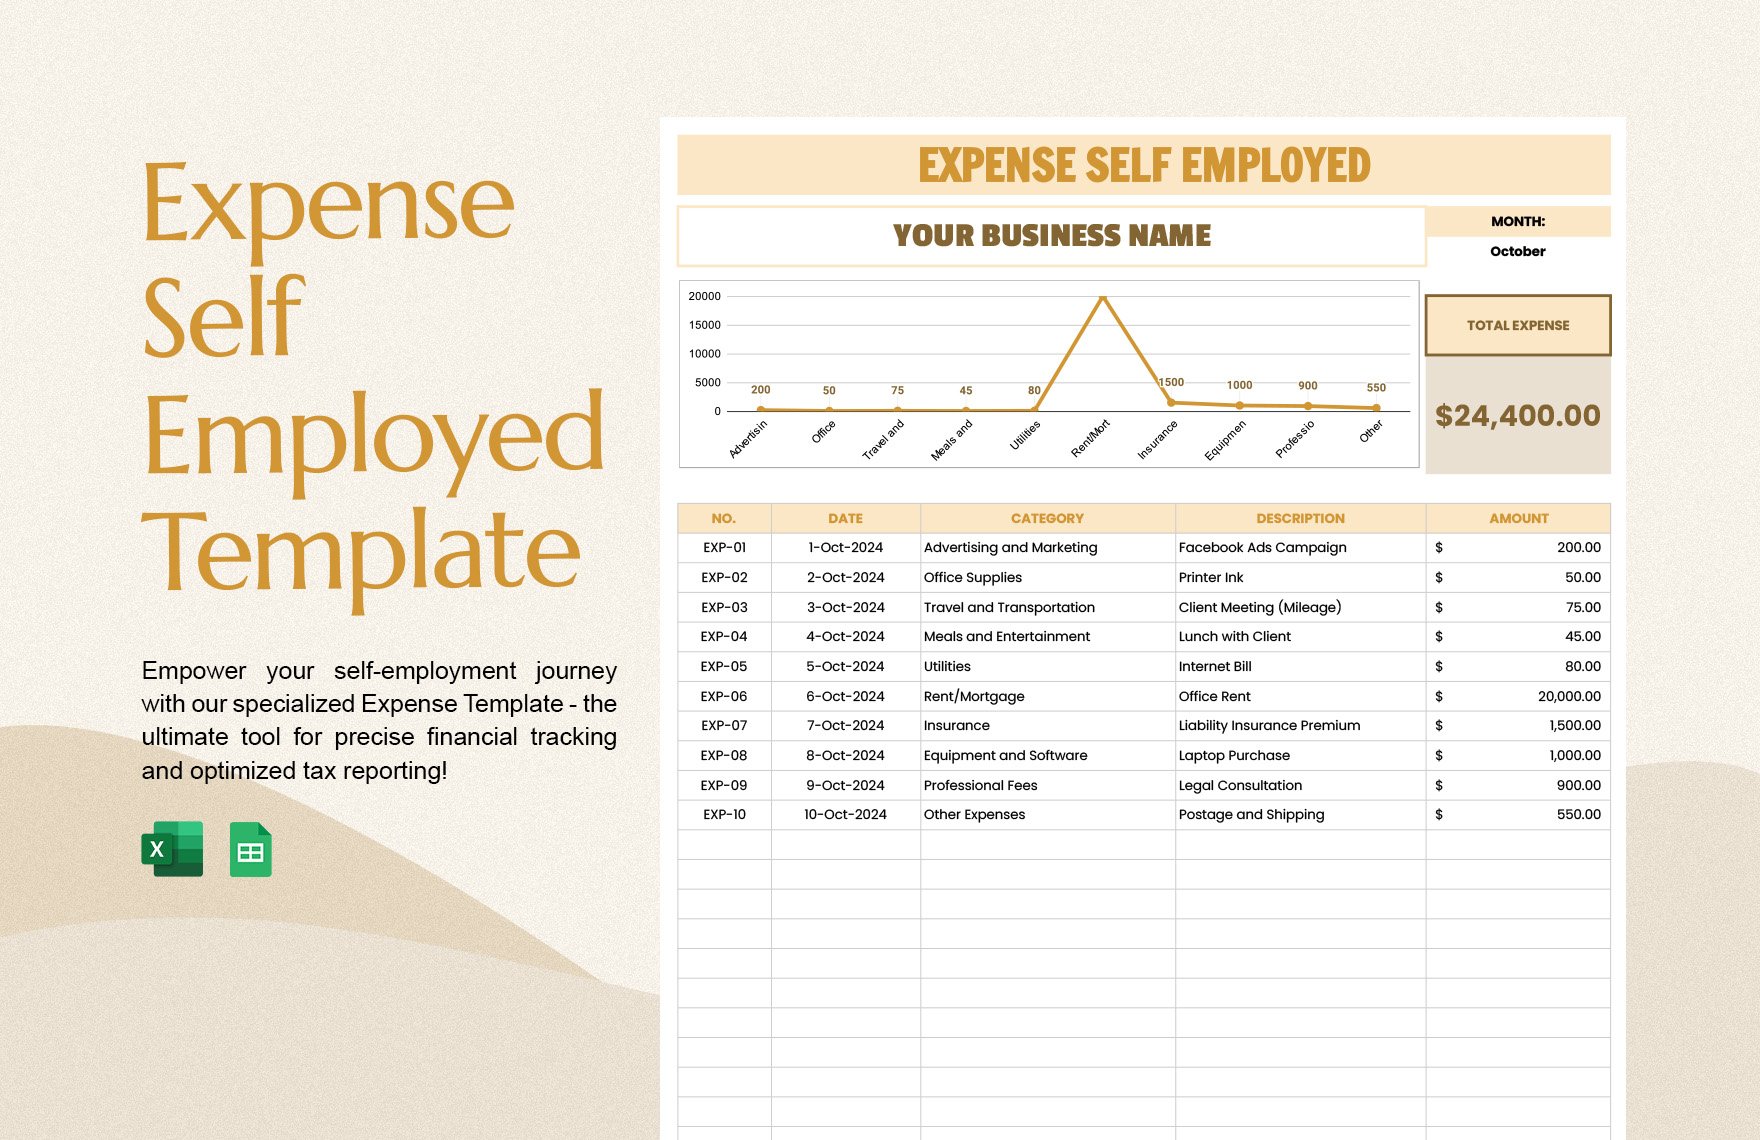 Expense Self Employed Template in Excel, Google Sheets